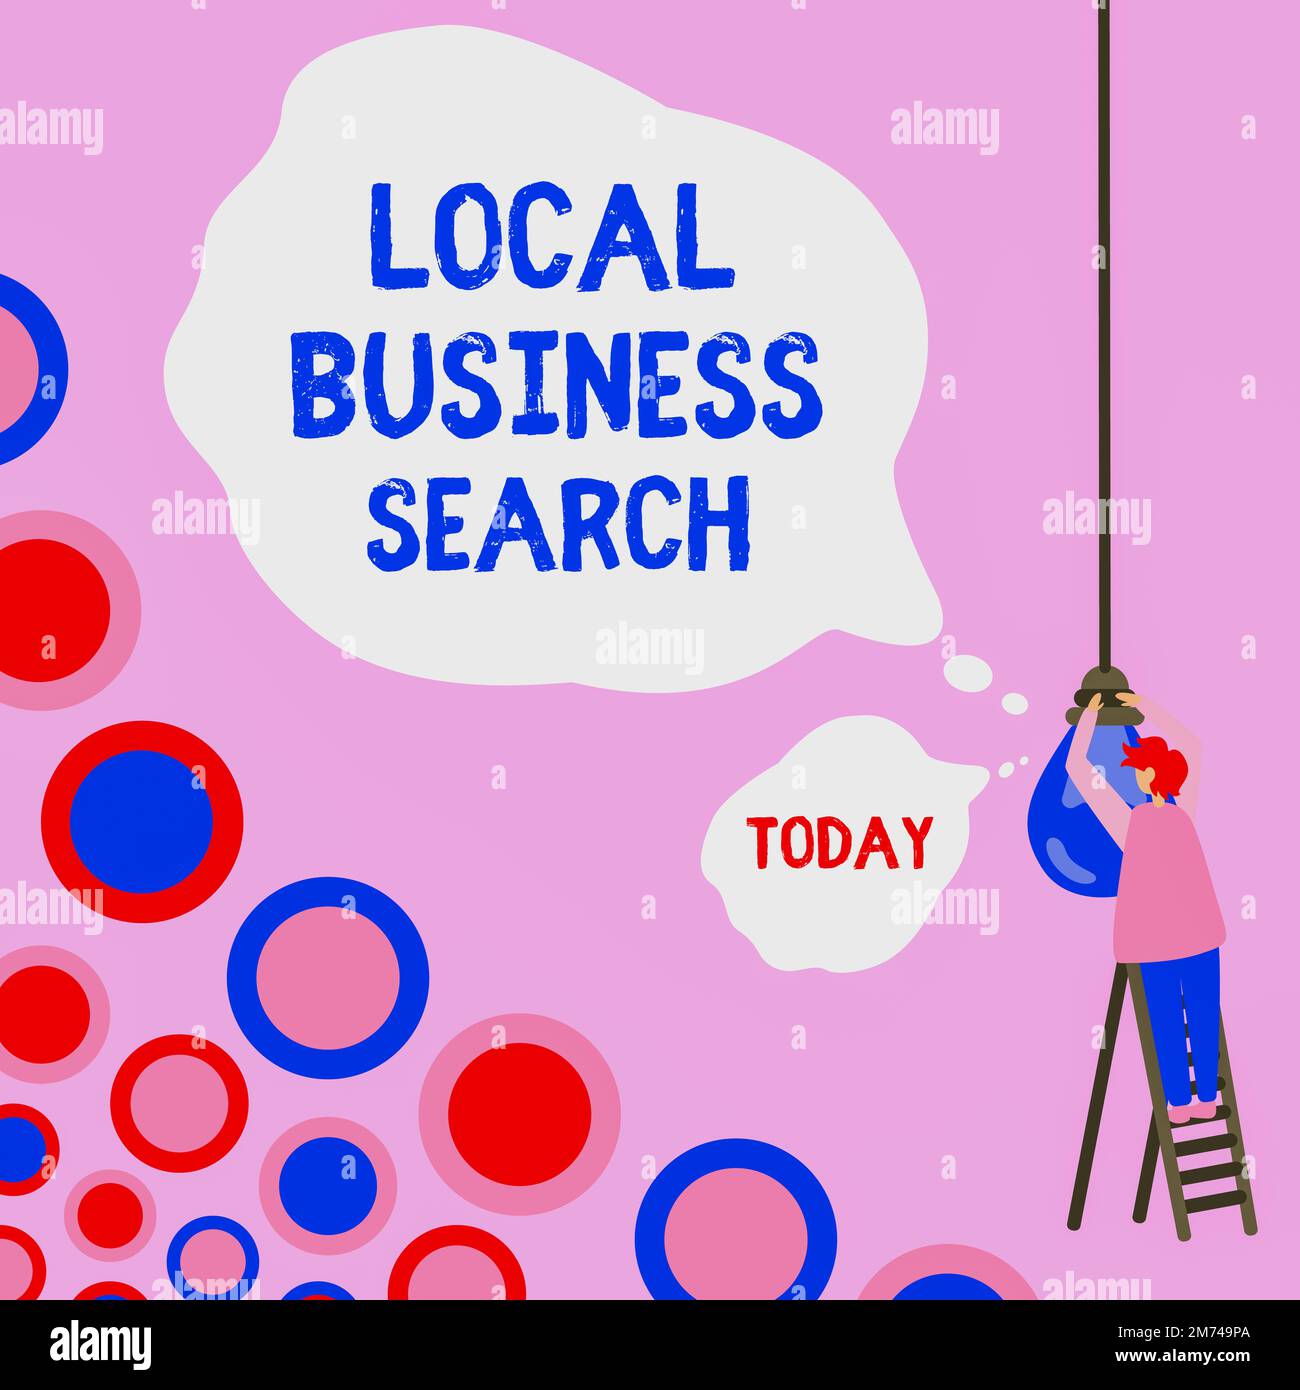 Writing displaying text Local Business Search. Concept meaning looking for product or service that is locally located Stock Photo